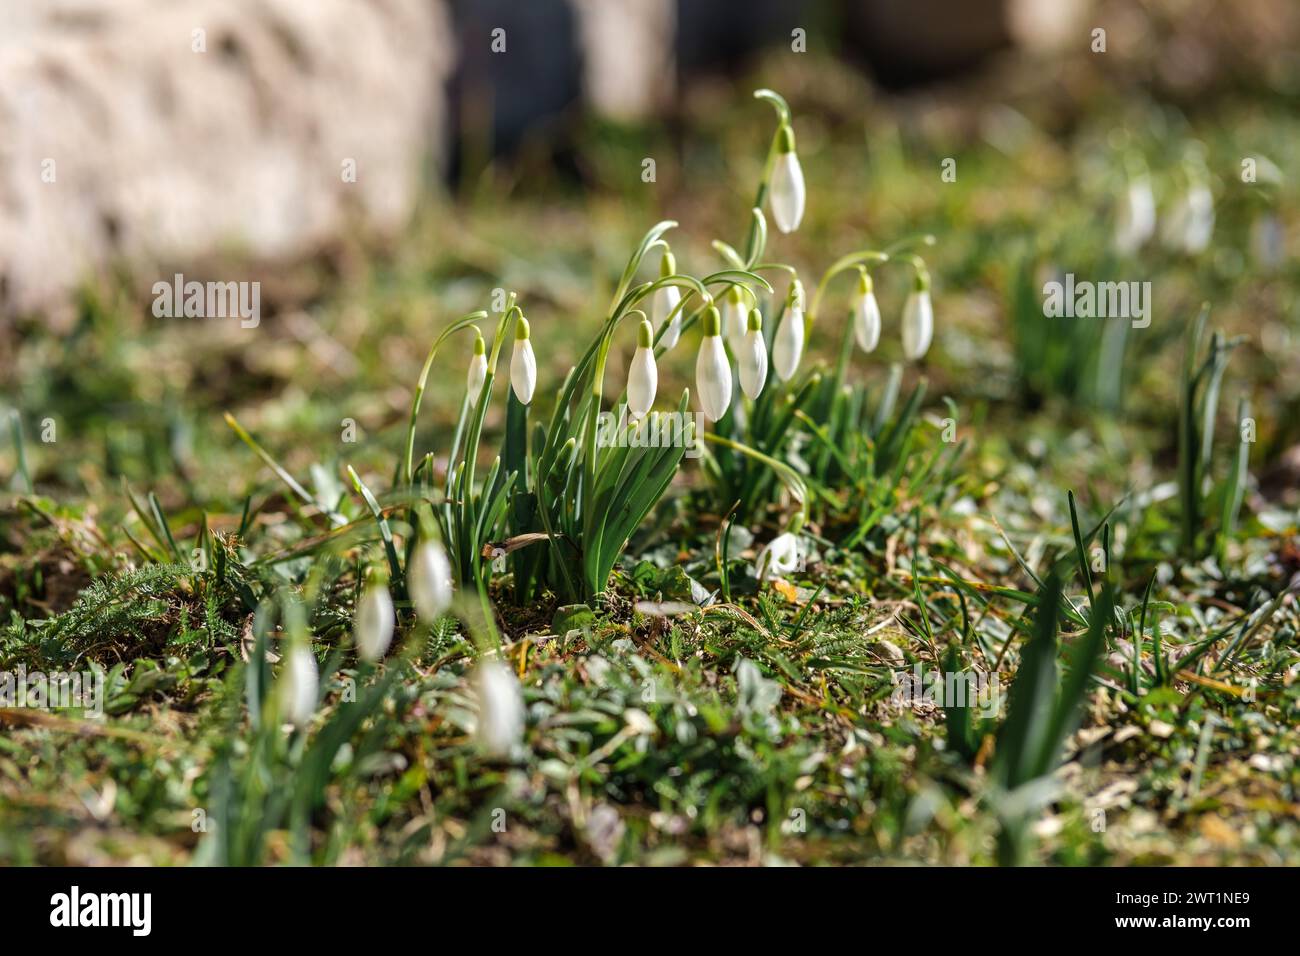 Amidst Latvia's woodlands, snowdrops bloom, a testament to nature's resilience. Stock Photo